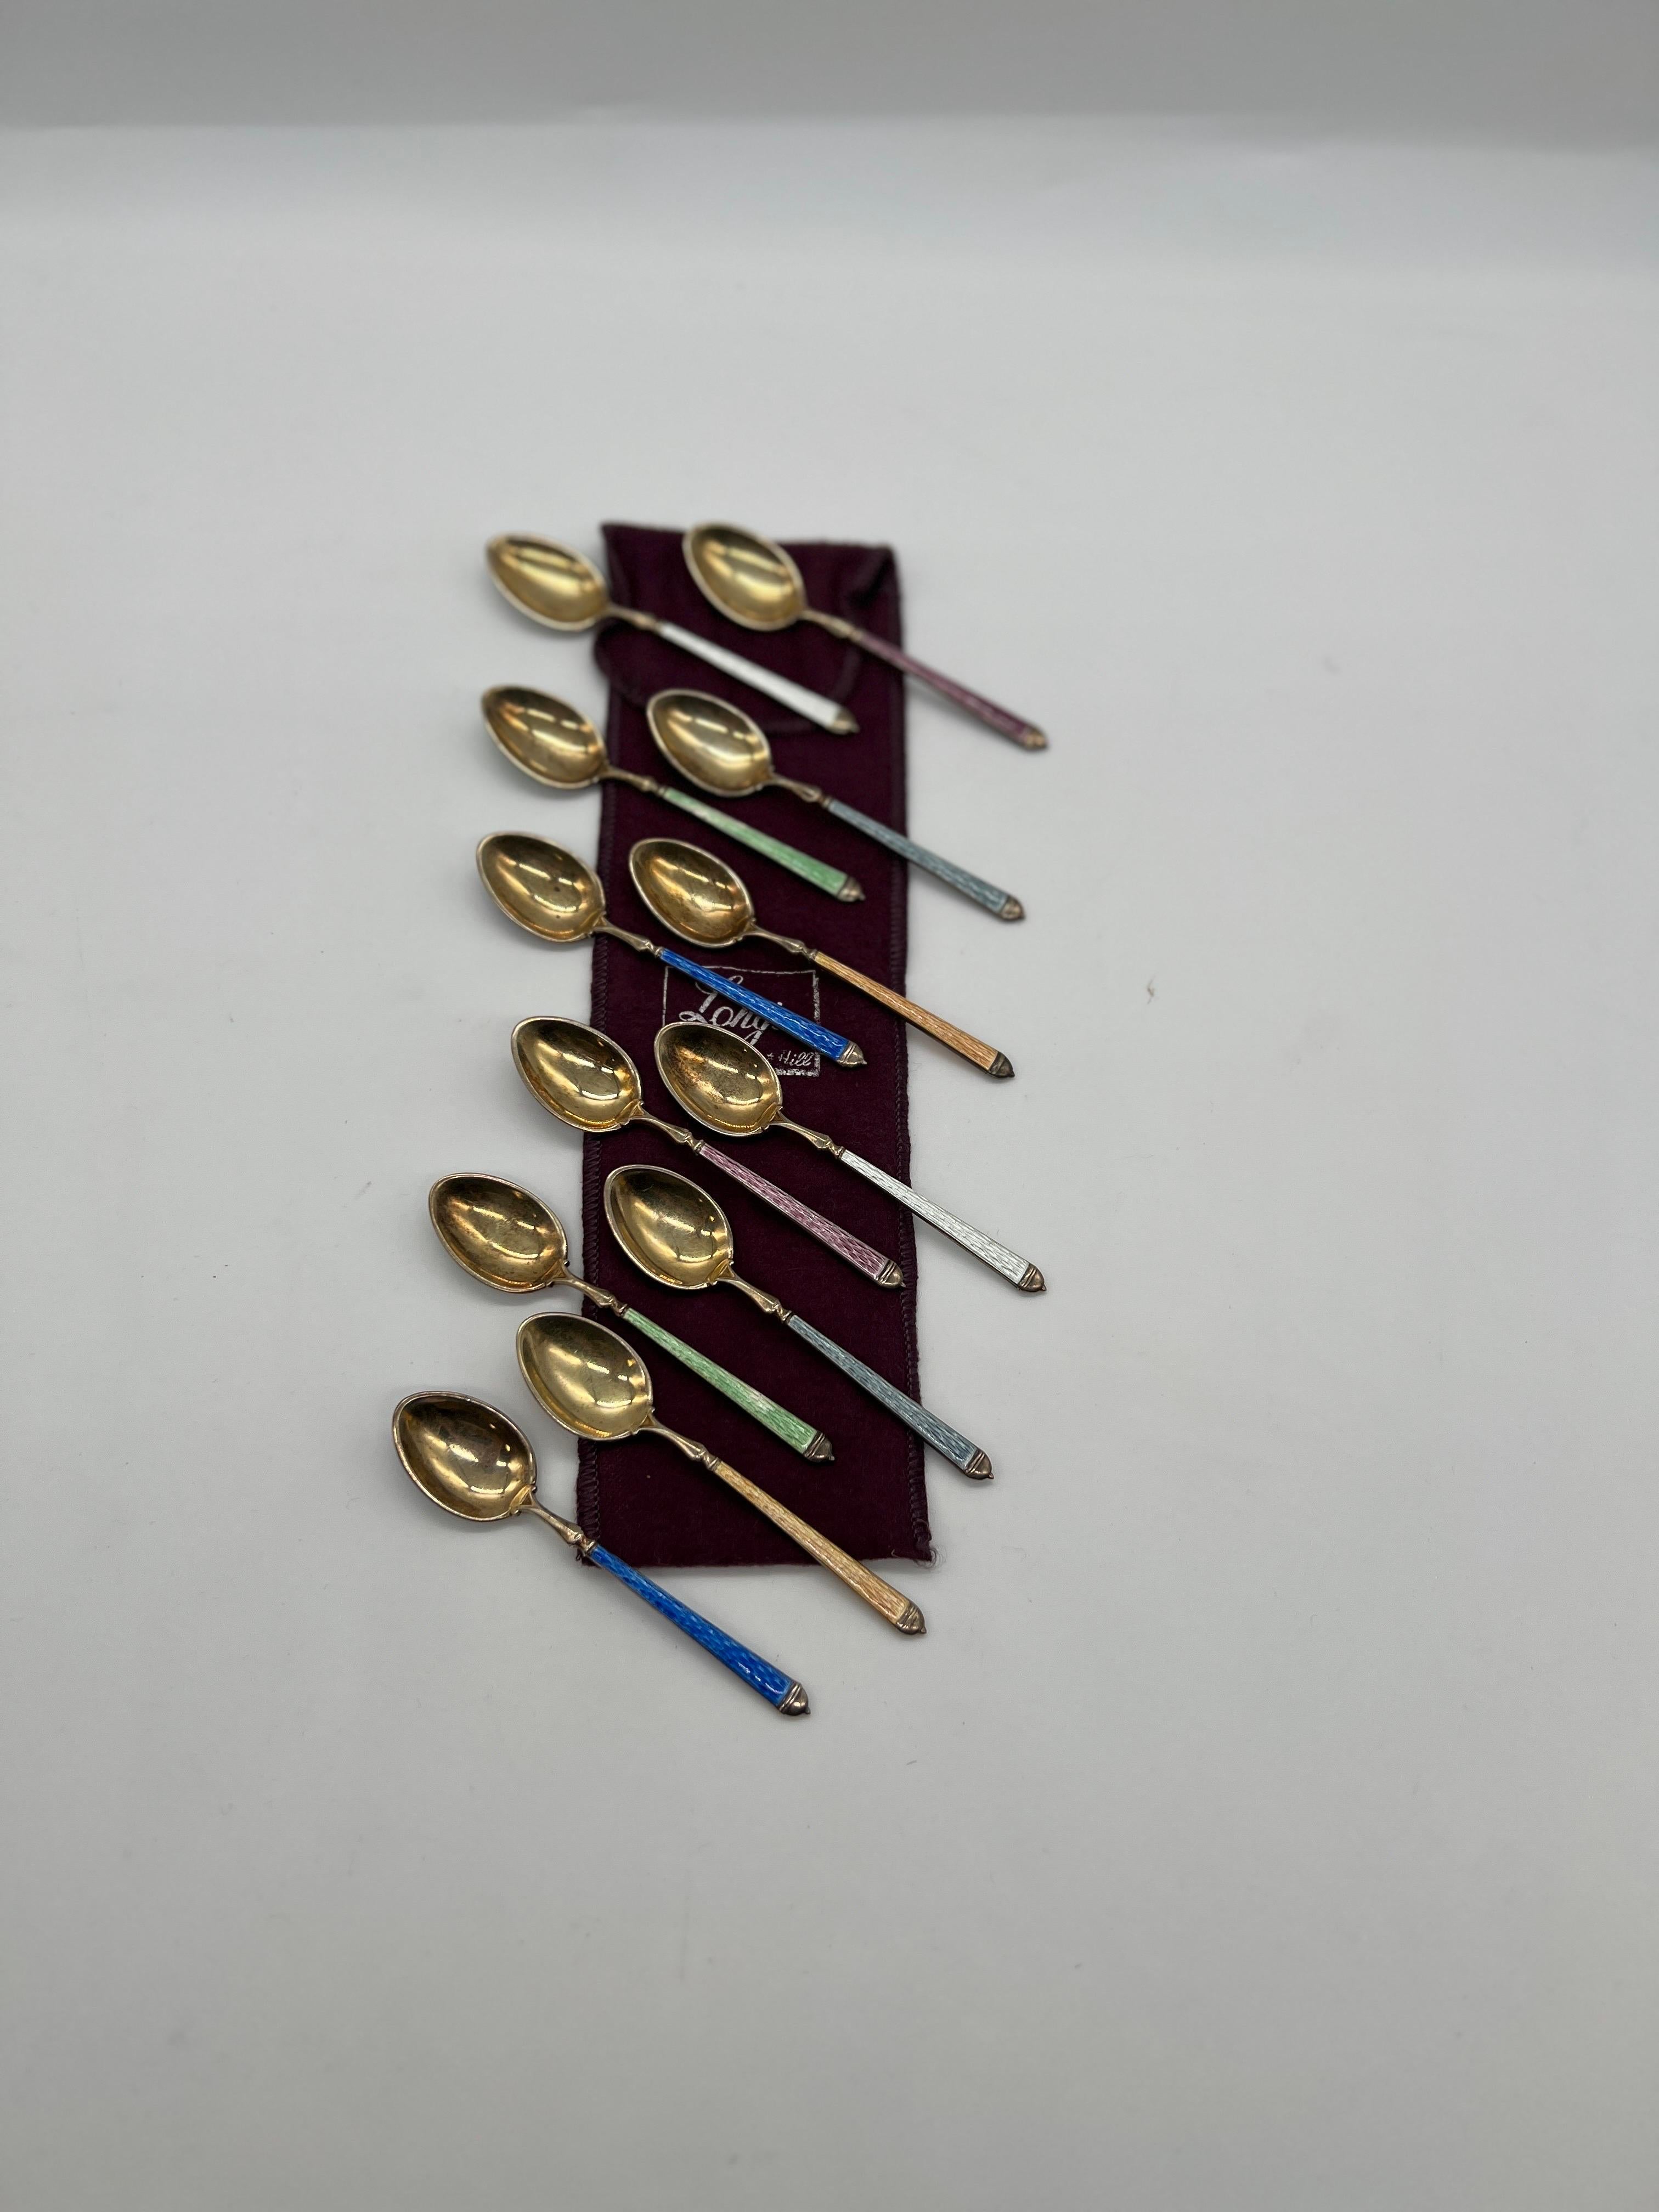 The Thomae Company (American, founded 1920), circa mid 20th century.

A fine grouping of 12 sterling silver demitasse spoons in 6 different color enamels, cobalt, orange, green, light blue, white and purple. The bowls of each spoon have a gold gilt